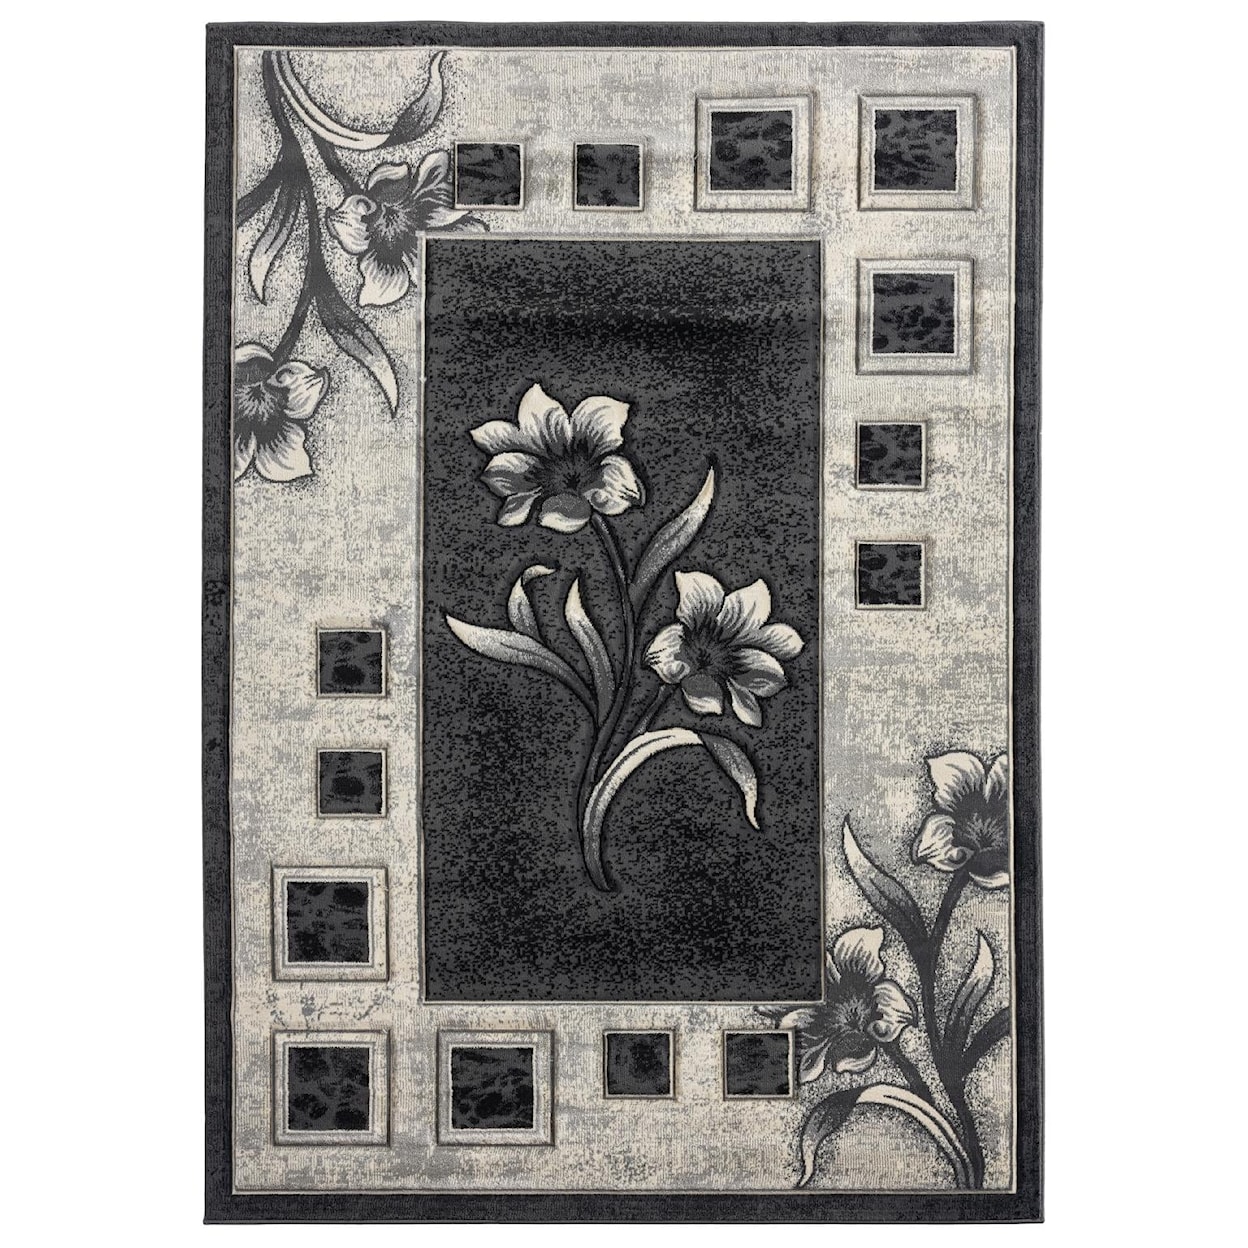 MDA Rugs Rhodes Collection RHODES 8X11 BLACK & WHITE AREA RUG |